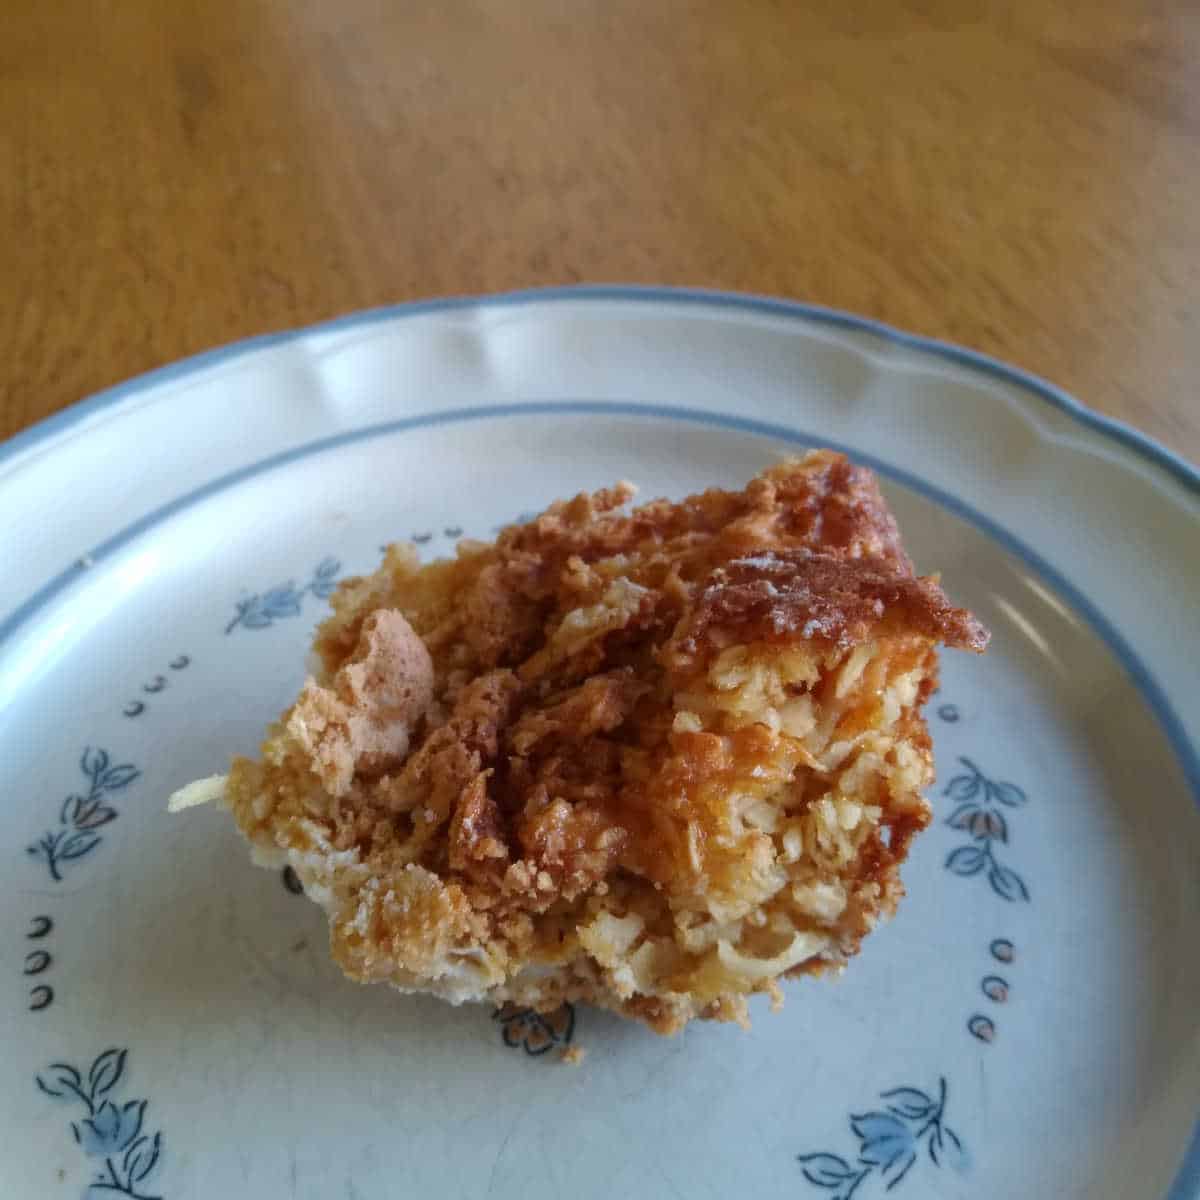 a browned overcooked coconut bar on a blue flowered plate